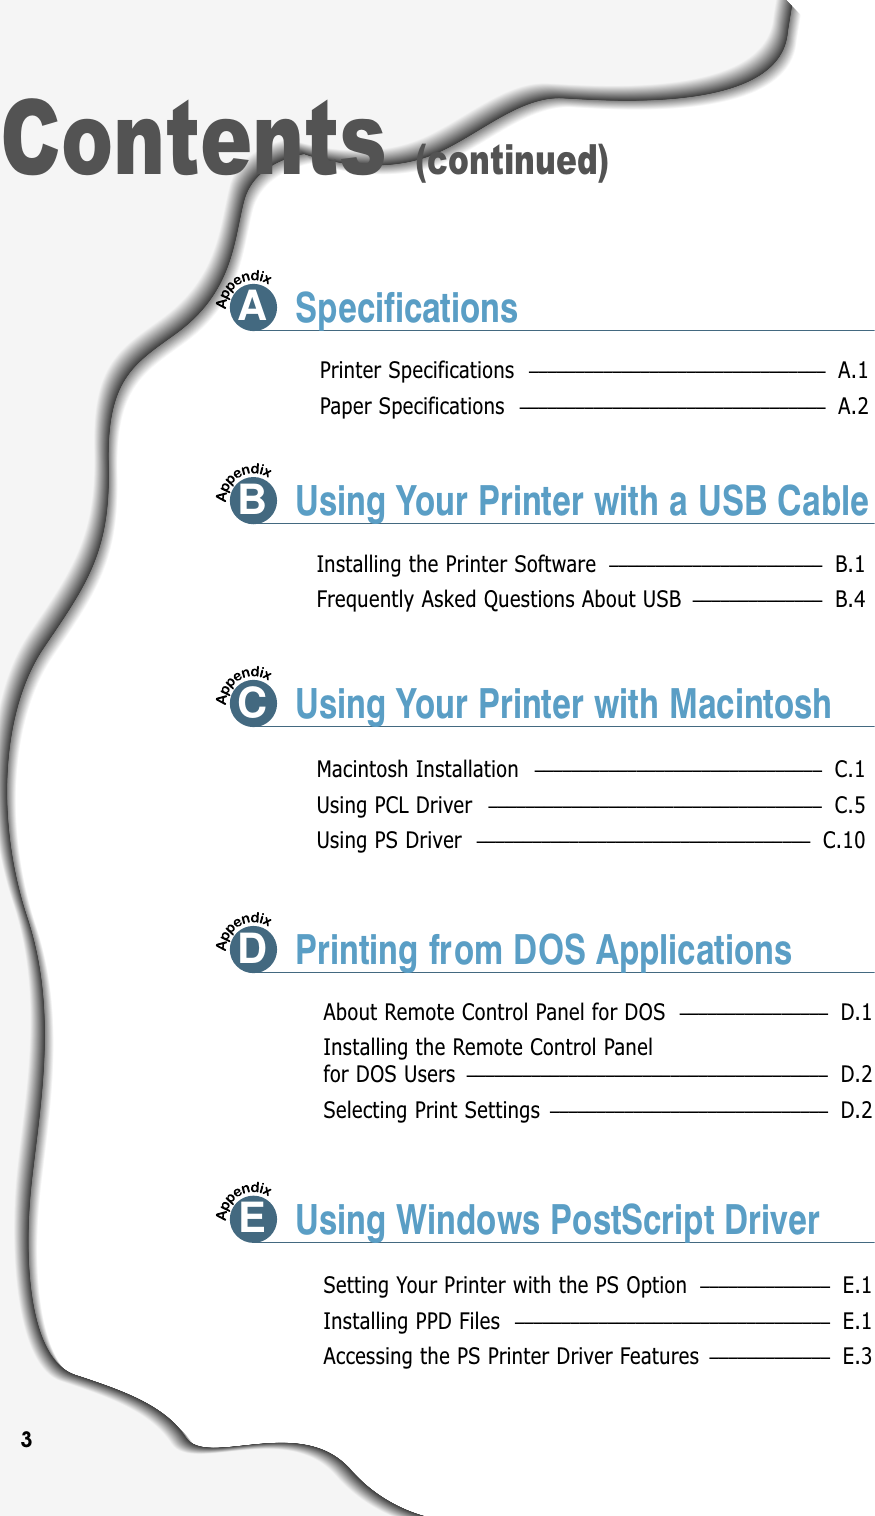 3Contents (continued)Printer Specifications –––––––––––––––––––––––––––––––– A.1Paper Specifications ––––––––––––––––––––––––––––––––– A.2ASpecificationsInstalling the Printer Software ––––––––––––––––––––––– B.1Frequently Asked Questions About USB –––––––––––––– B.4Macintosh Installation ––––––––––––––––––––––––––––––– C.1Using PCL Driver –––––––––––––––––––––––––––––––––––– C.5Using PS Driver –––––––––––––––––––––––––––––––––––– C.10About Remote Control Panel for DOS –––––––––––––––– D.1Installing the Remote Control Panel for DOS Users ––––––––––––––––––––––––––––––––––––––– D.2Selecting Print Settings –––––––––––––––––––––––––––––– D.2Setting Your Printer with the PS Option –––––––––––––– E.1Installing PPD Files  –––––––––––––––––––––––––––––––––– E.1Accessing the PS Printer Driver Features ––––––––––––– E.3BUsing Your Printer with a USB CableCUsing Your Printer with MacintoshDPrinting from DOS ApplicationsEUsing Windows PostScript Driver